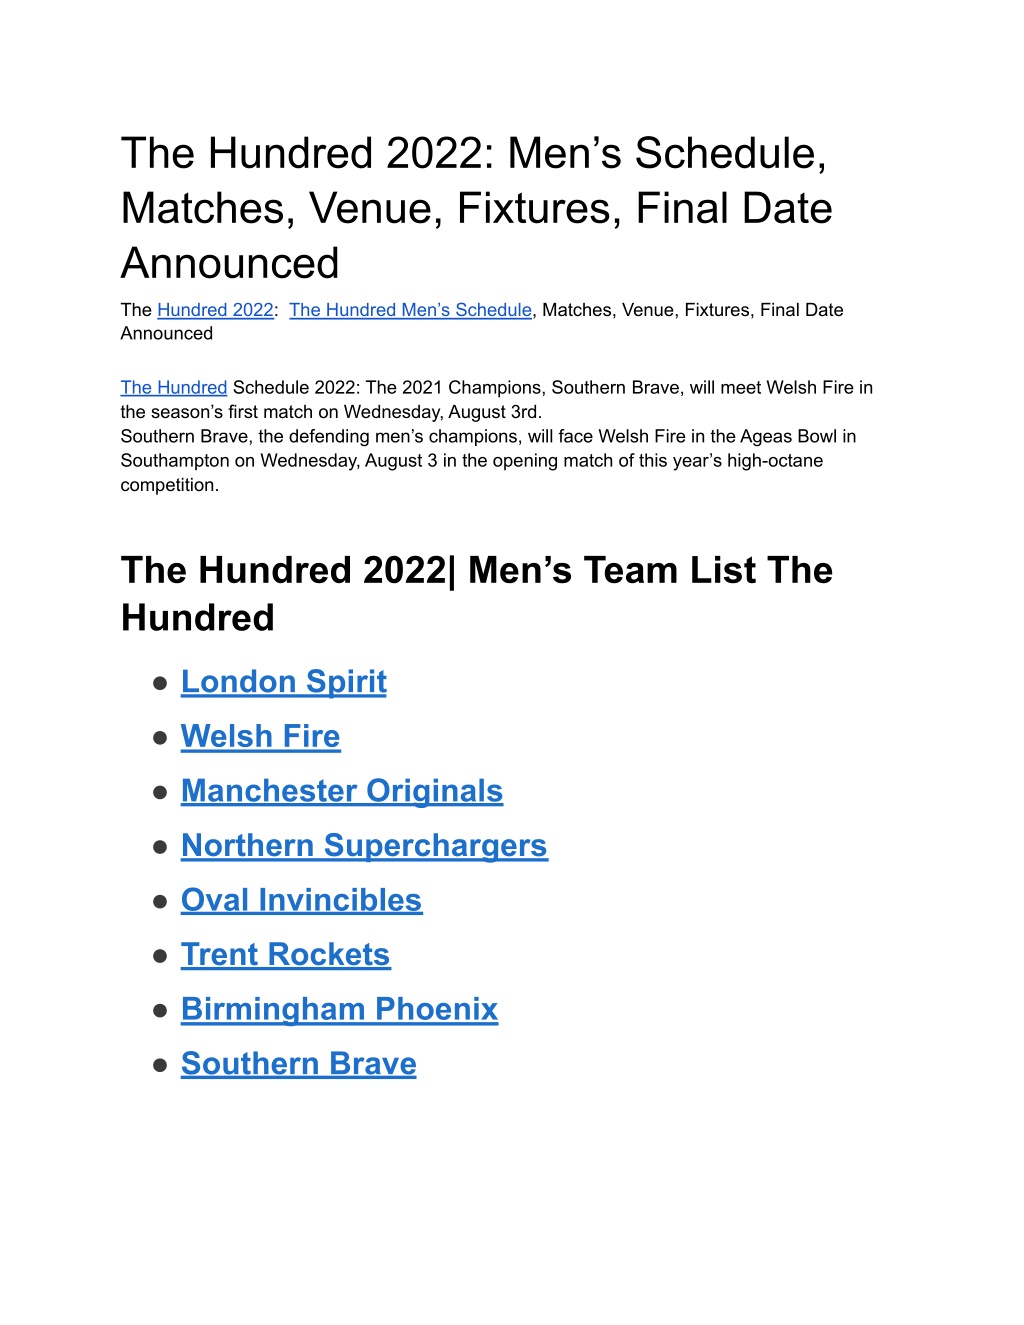 Ppt The Hundred 2022 Mens Schedule Matches Venue Fixtures Final Date Announced 0181